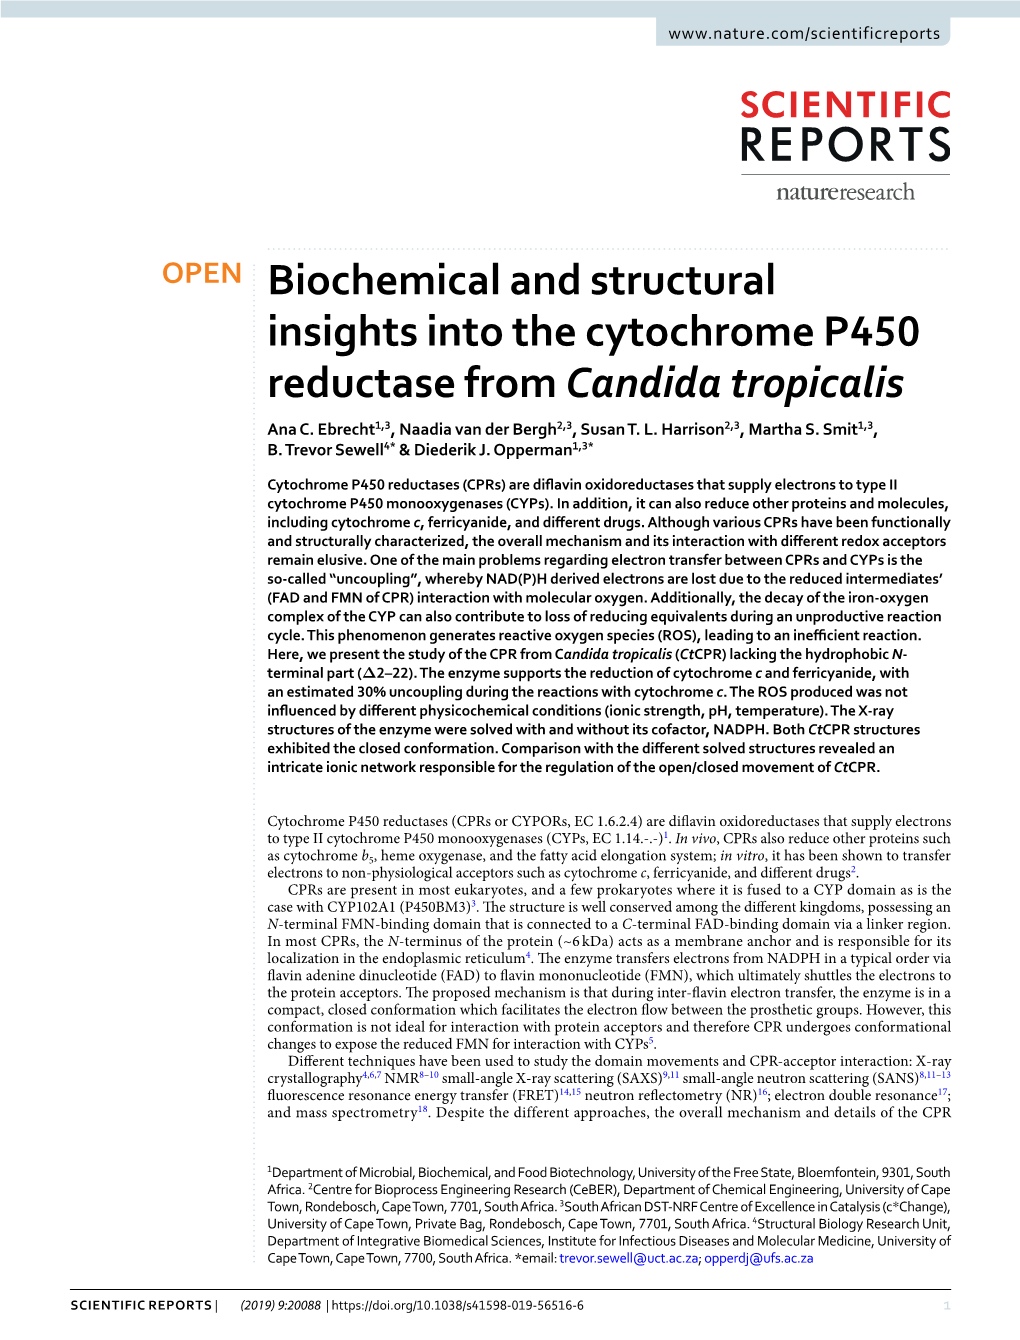 Biochemical and Structural Insights Into the Cytochrome P450 Reductase from Candida Tropicalis Ana C